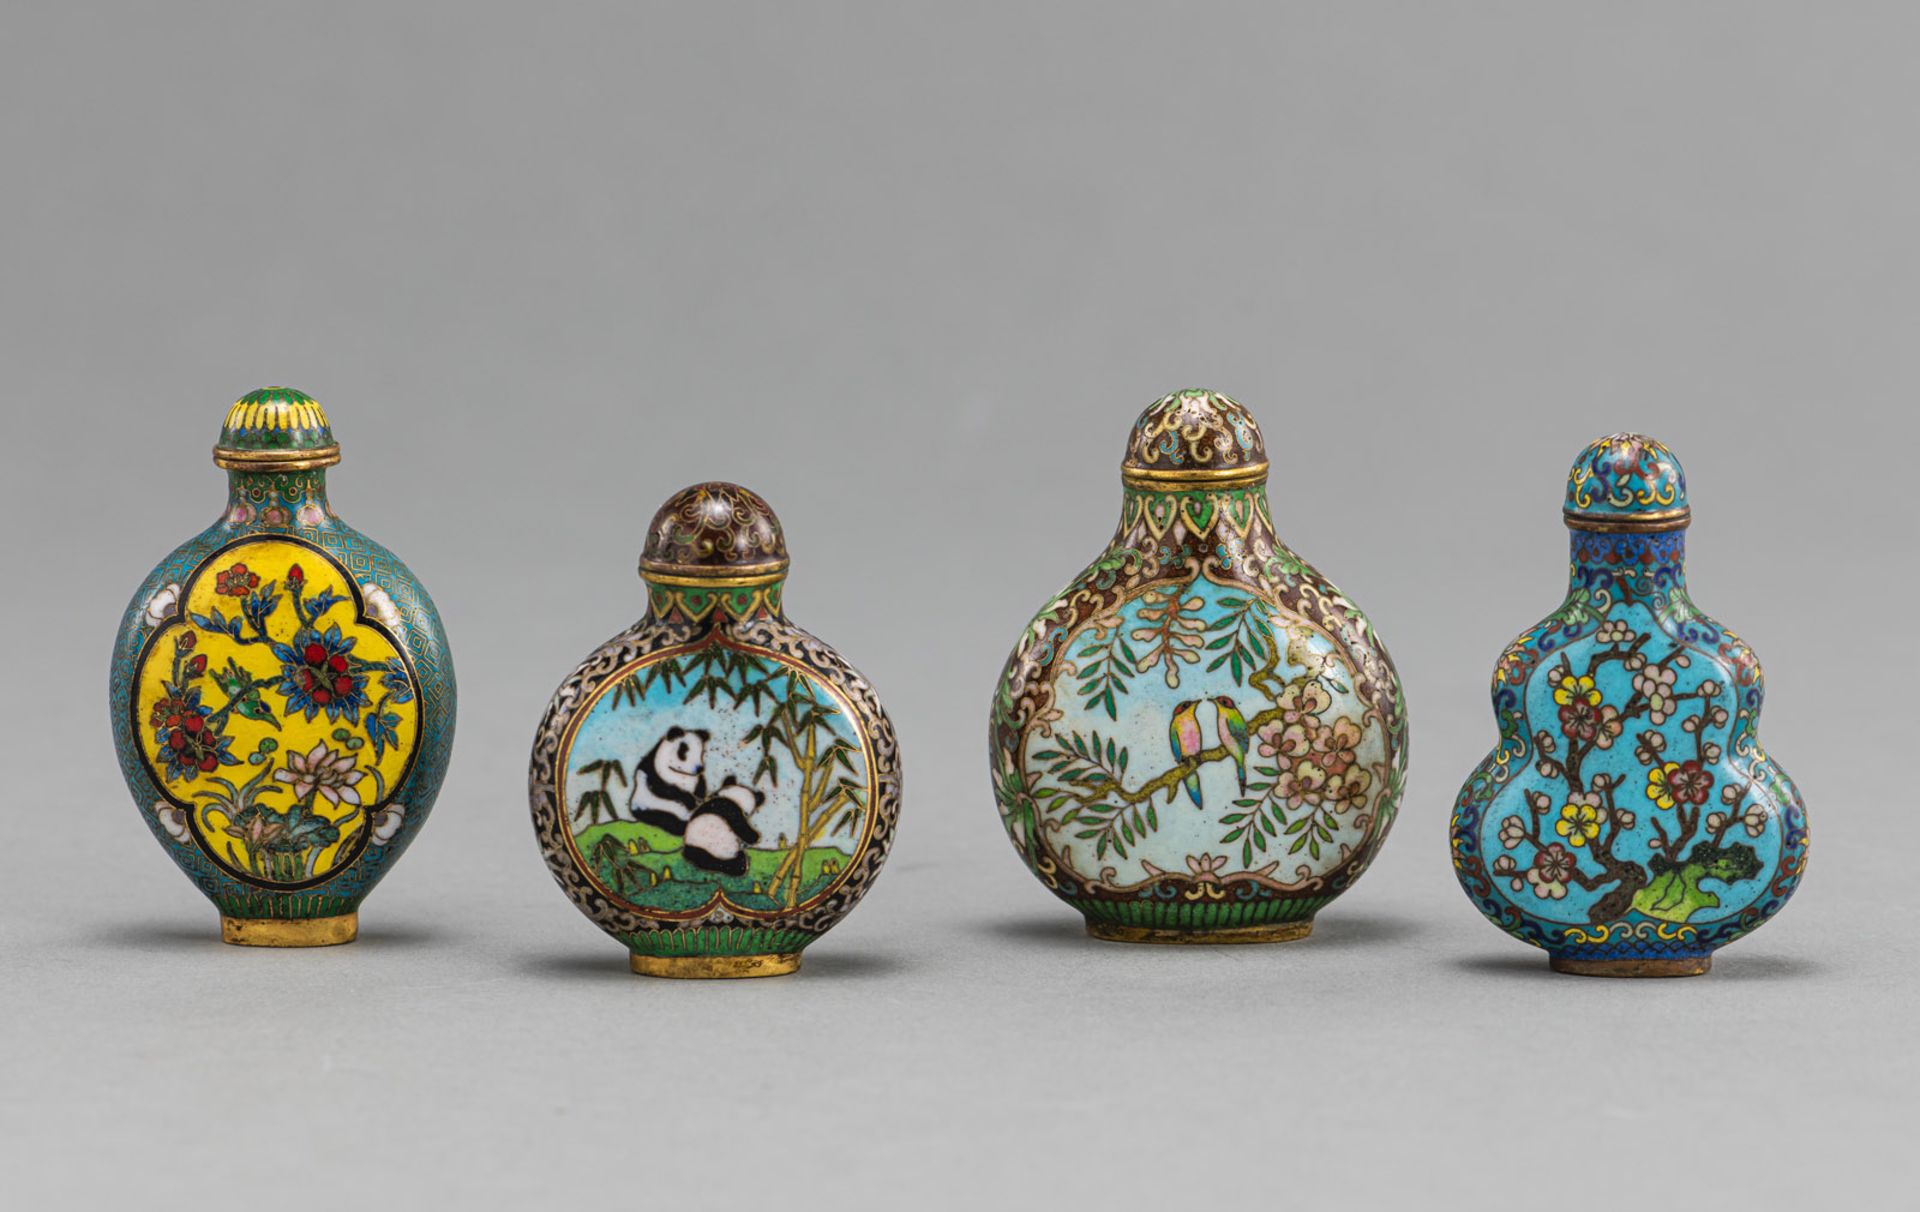 FOUR CLOISONNÉ SNUFFBOTTLES WITH DEPICTIONS OF FLOWERS AND ANIMALS - Image 2 of 3